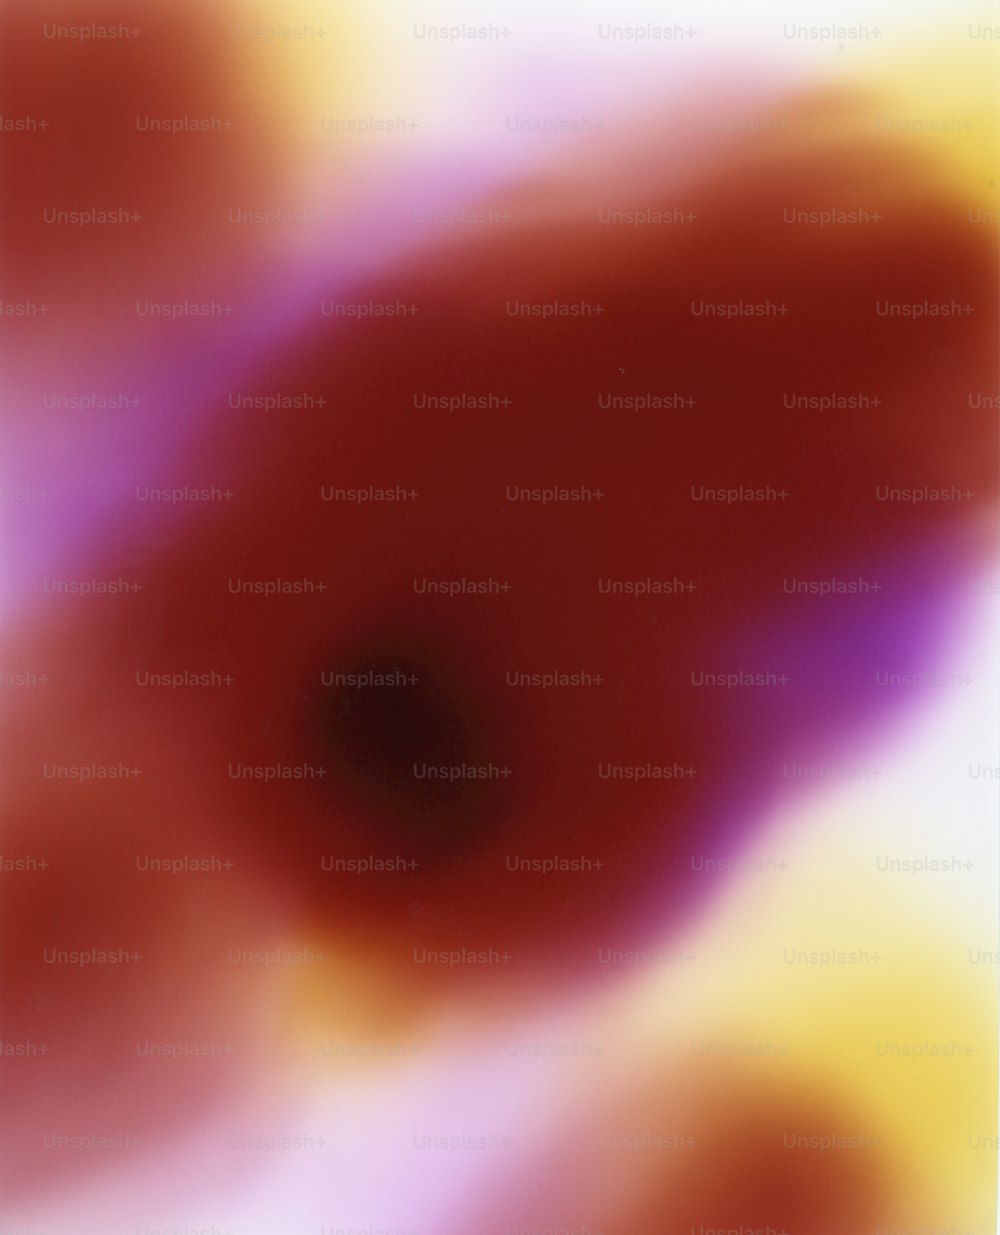 a blurry image of a red and yellow object